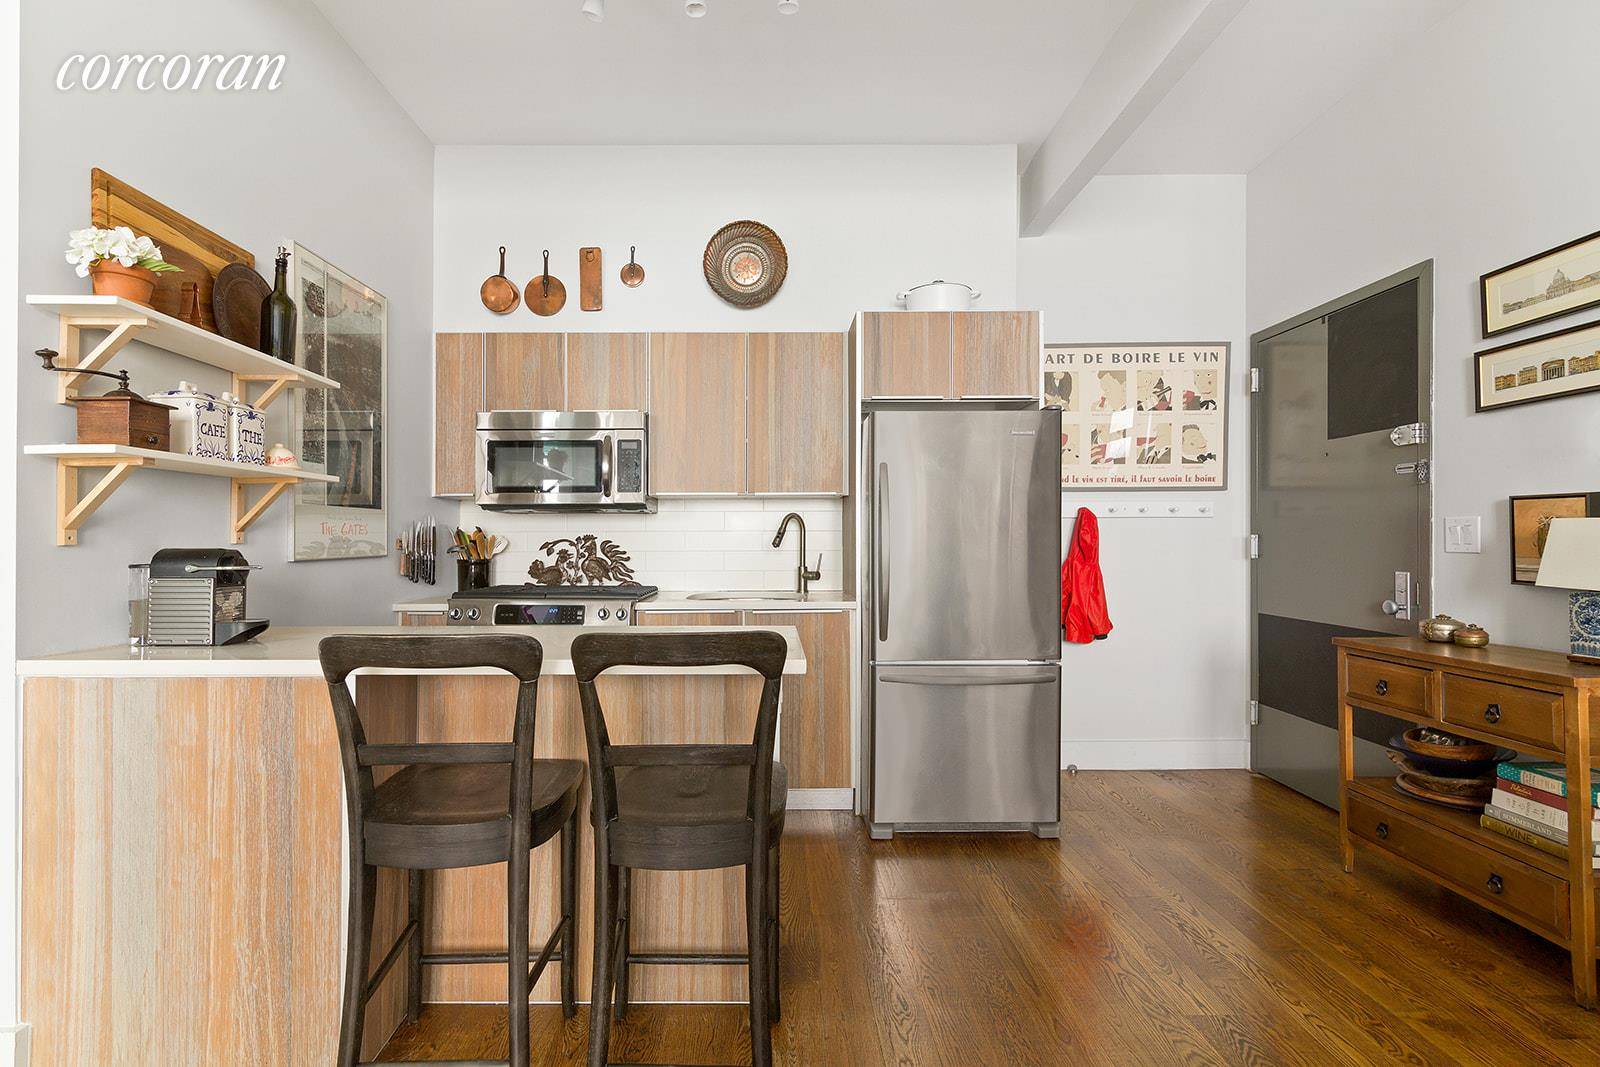 655 Franklin is an intimate boutique condo building in the exciting and beautiful neighborhood of Crown Heights.